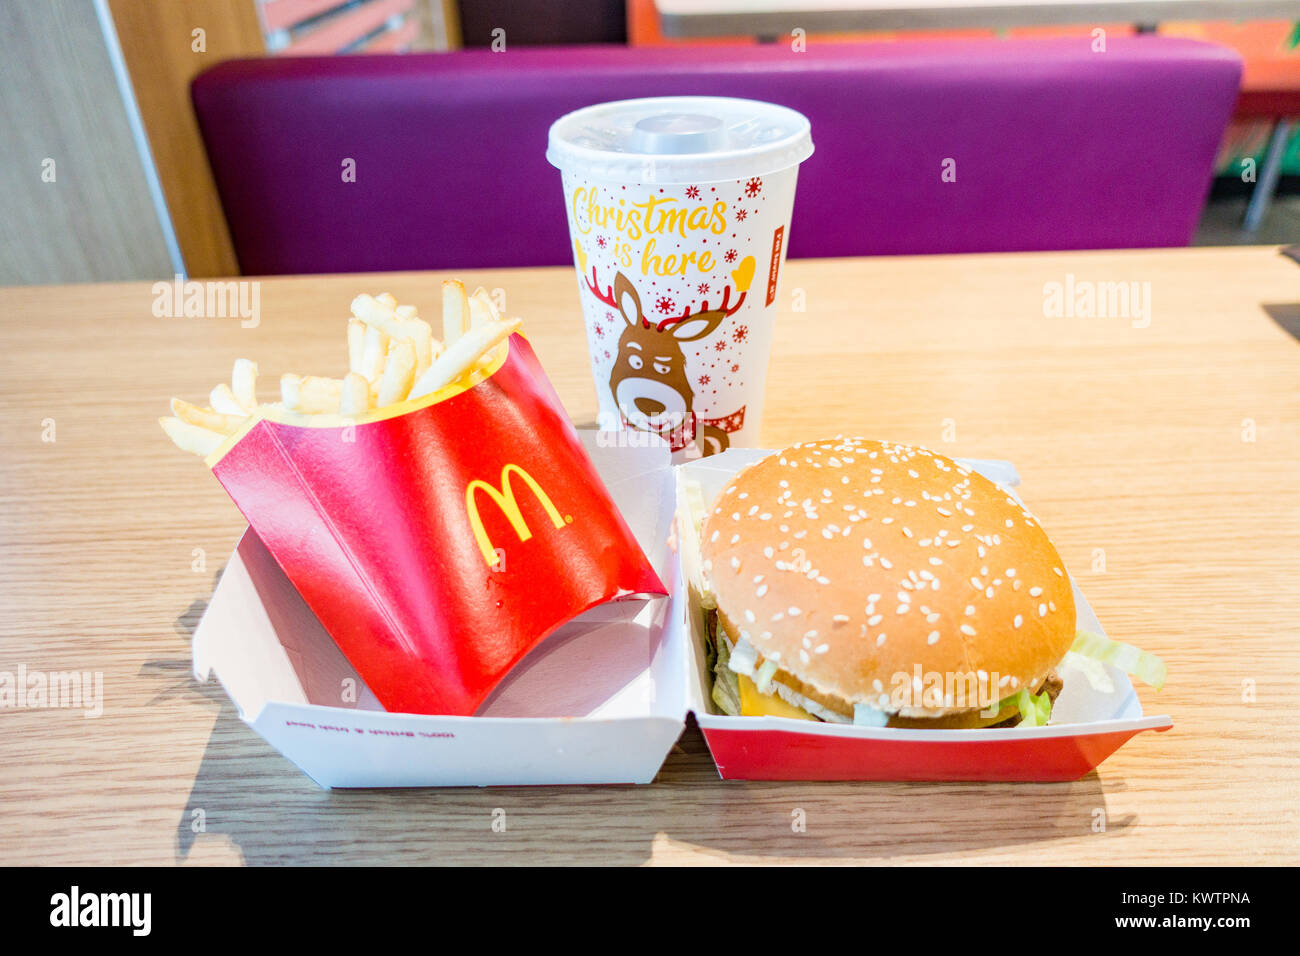 A Big Mac Meal on a table in a McDonald's fast food restaurant. Stock Photo